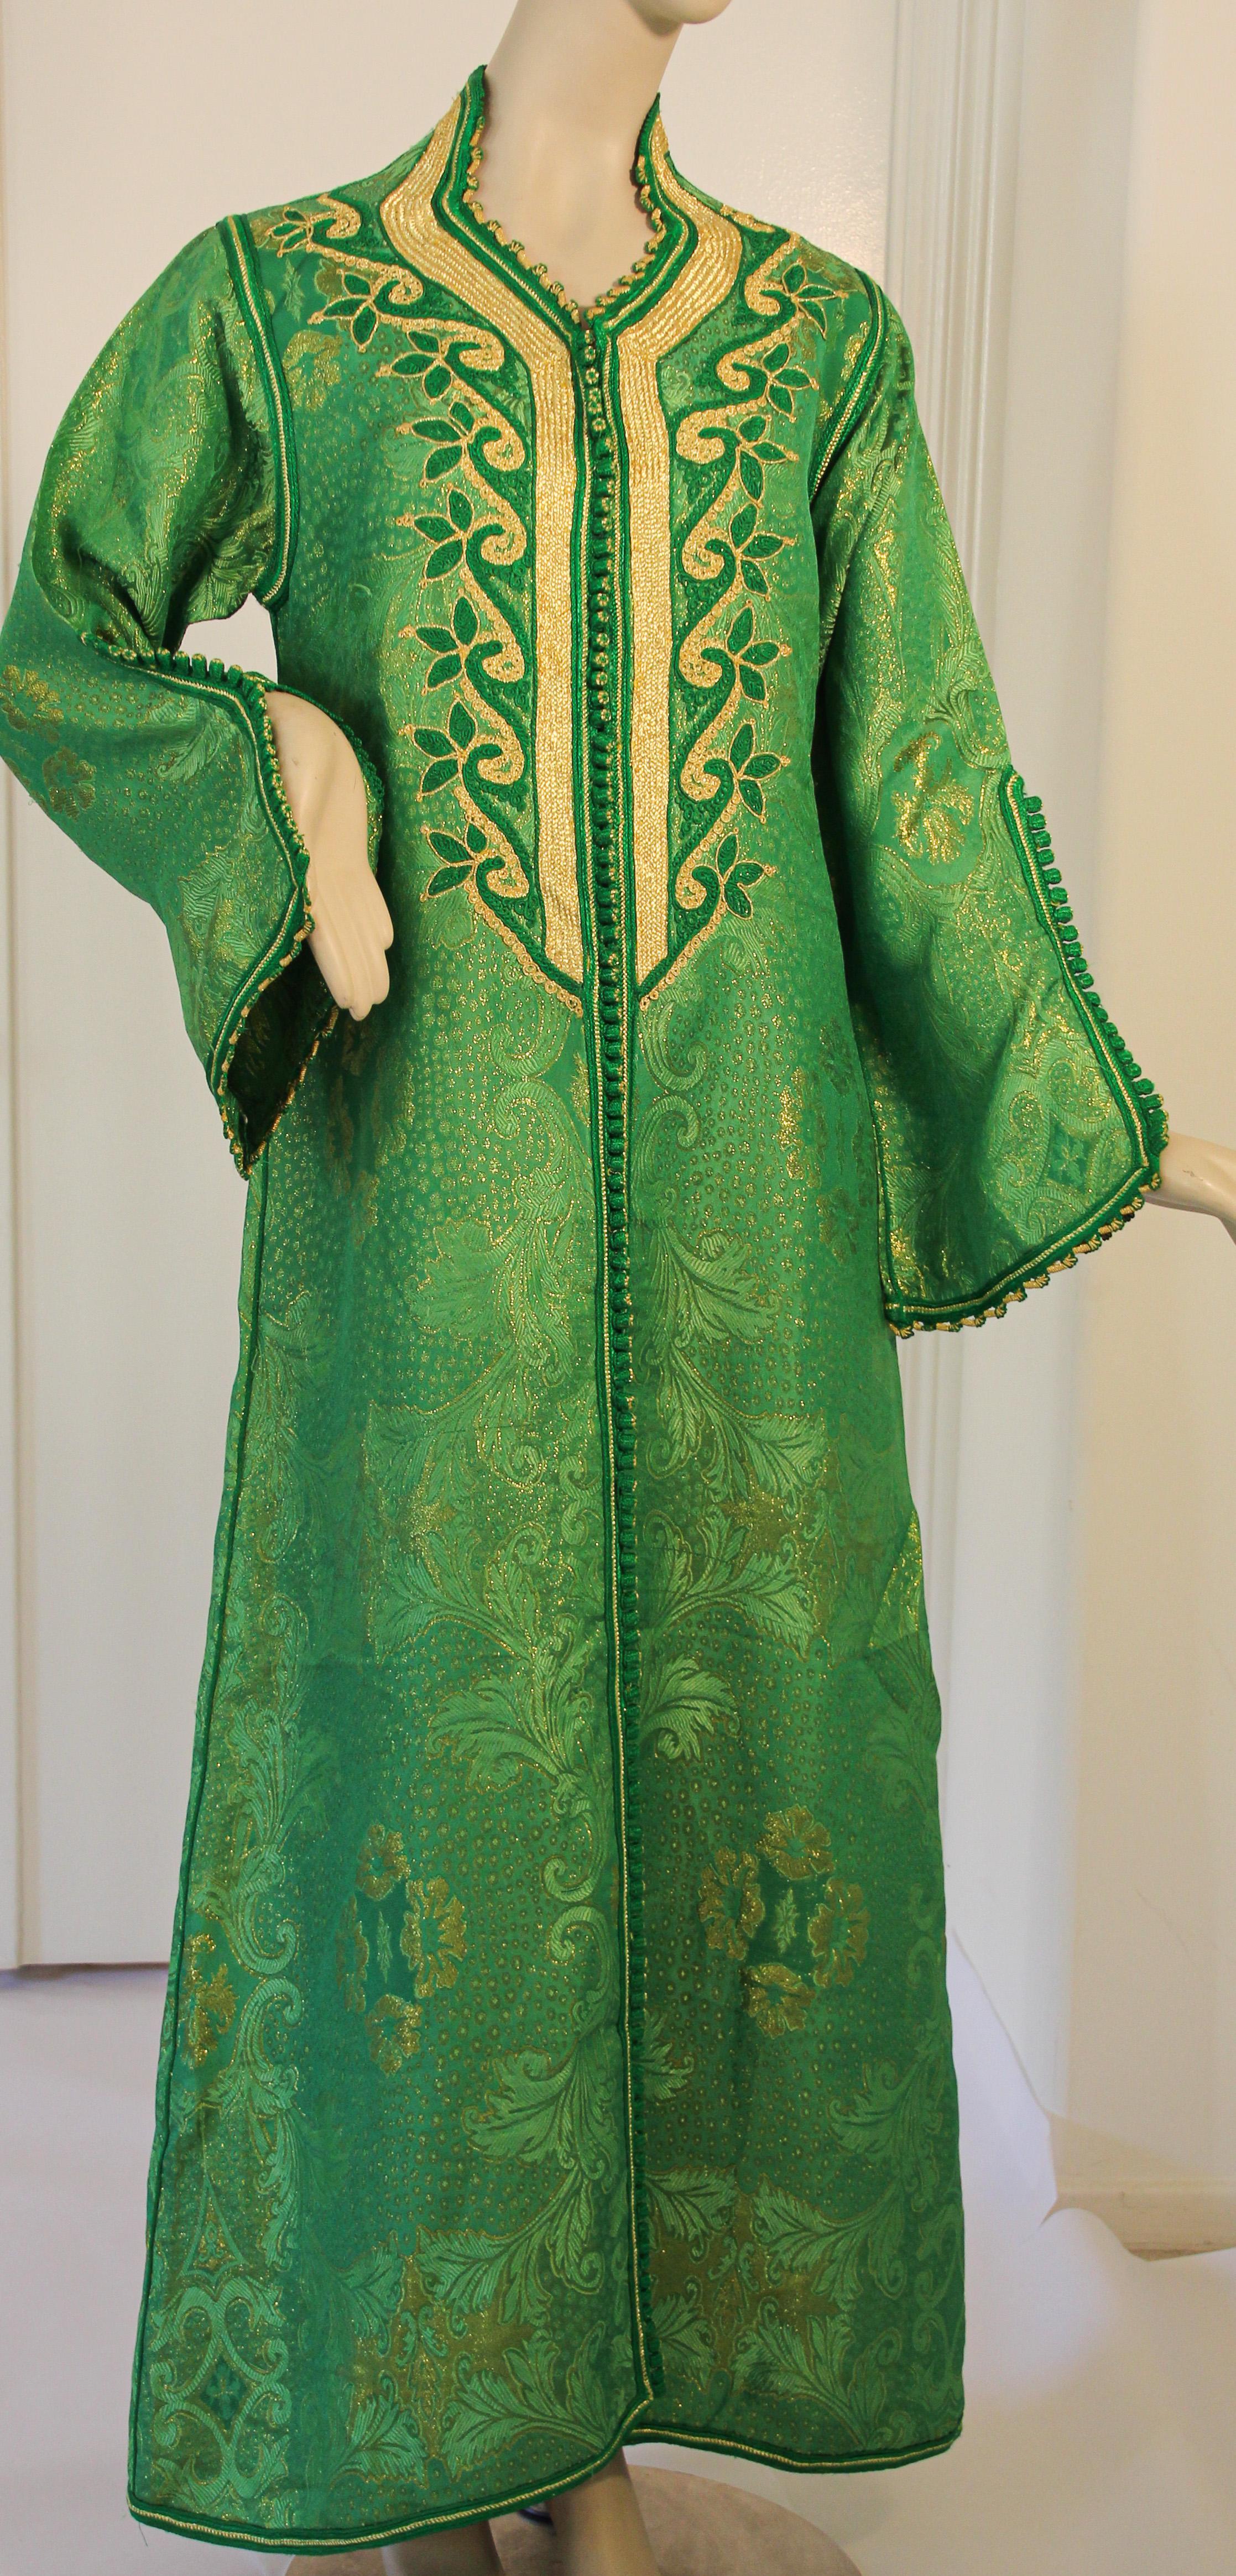 1960s Moroccan Caftan Emerald Green and Gold Metallic Brocade Kaftan In Good Condition For Sale In North Hollywood, CA